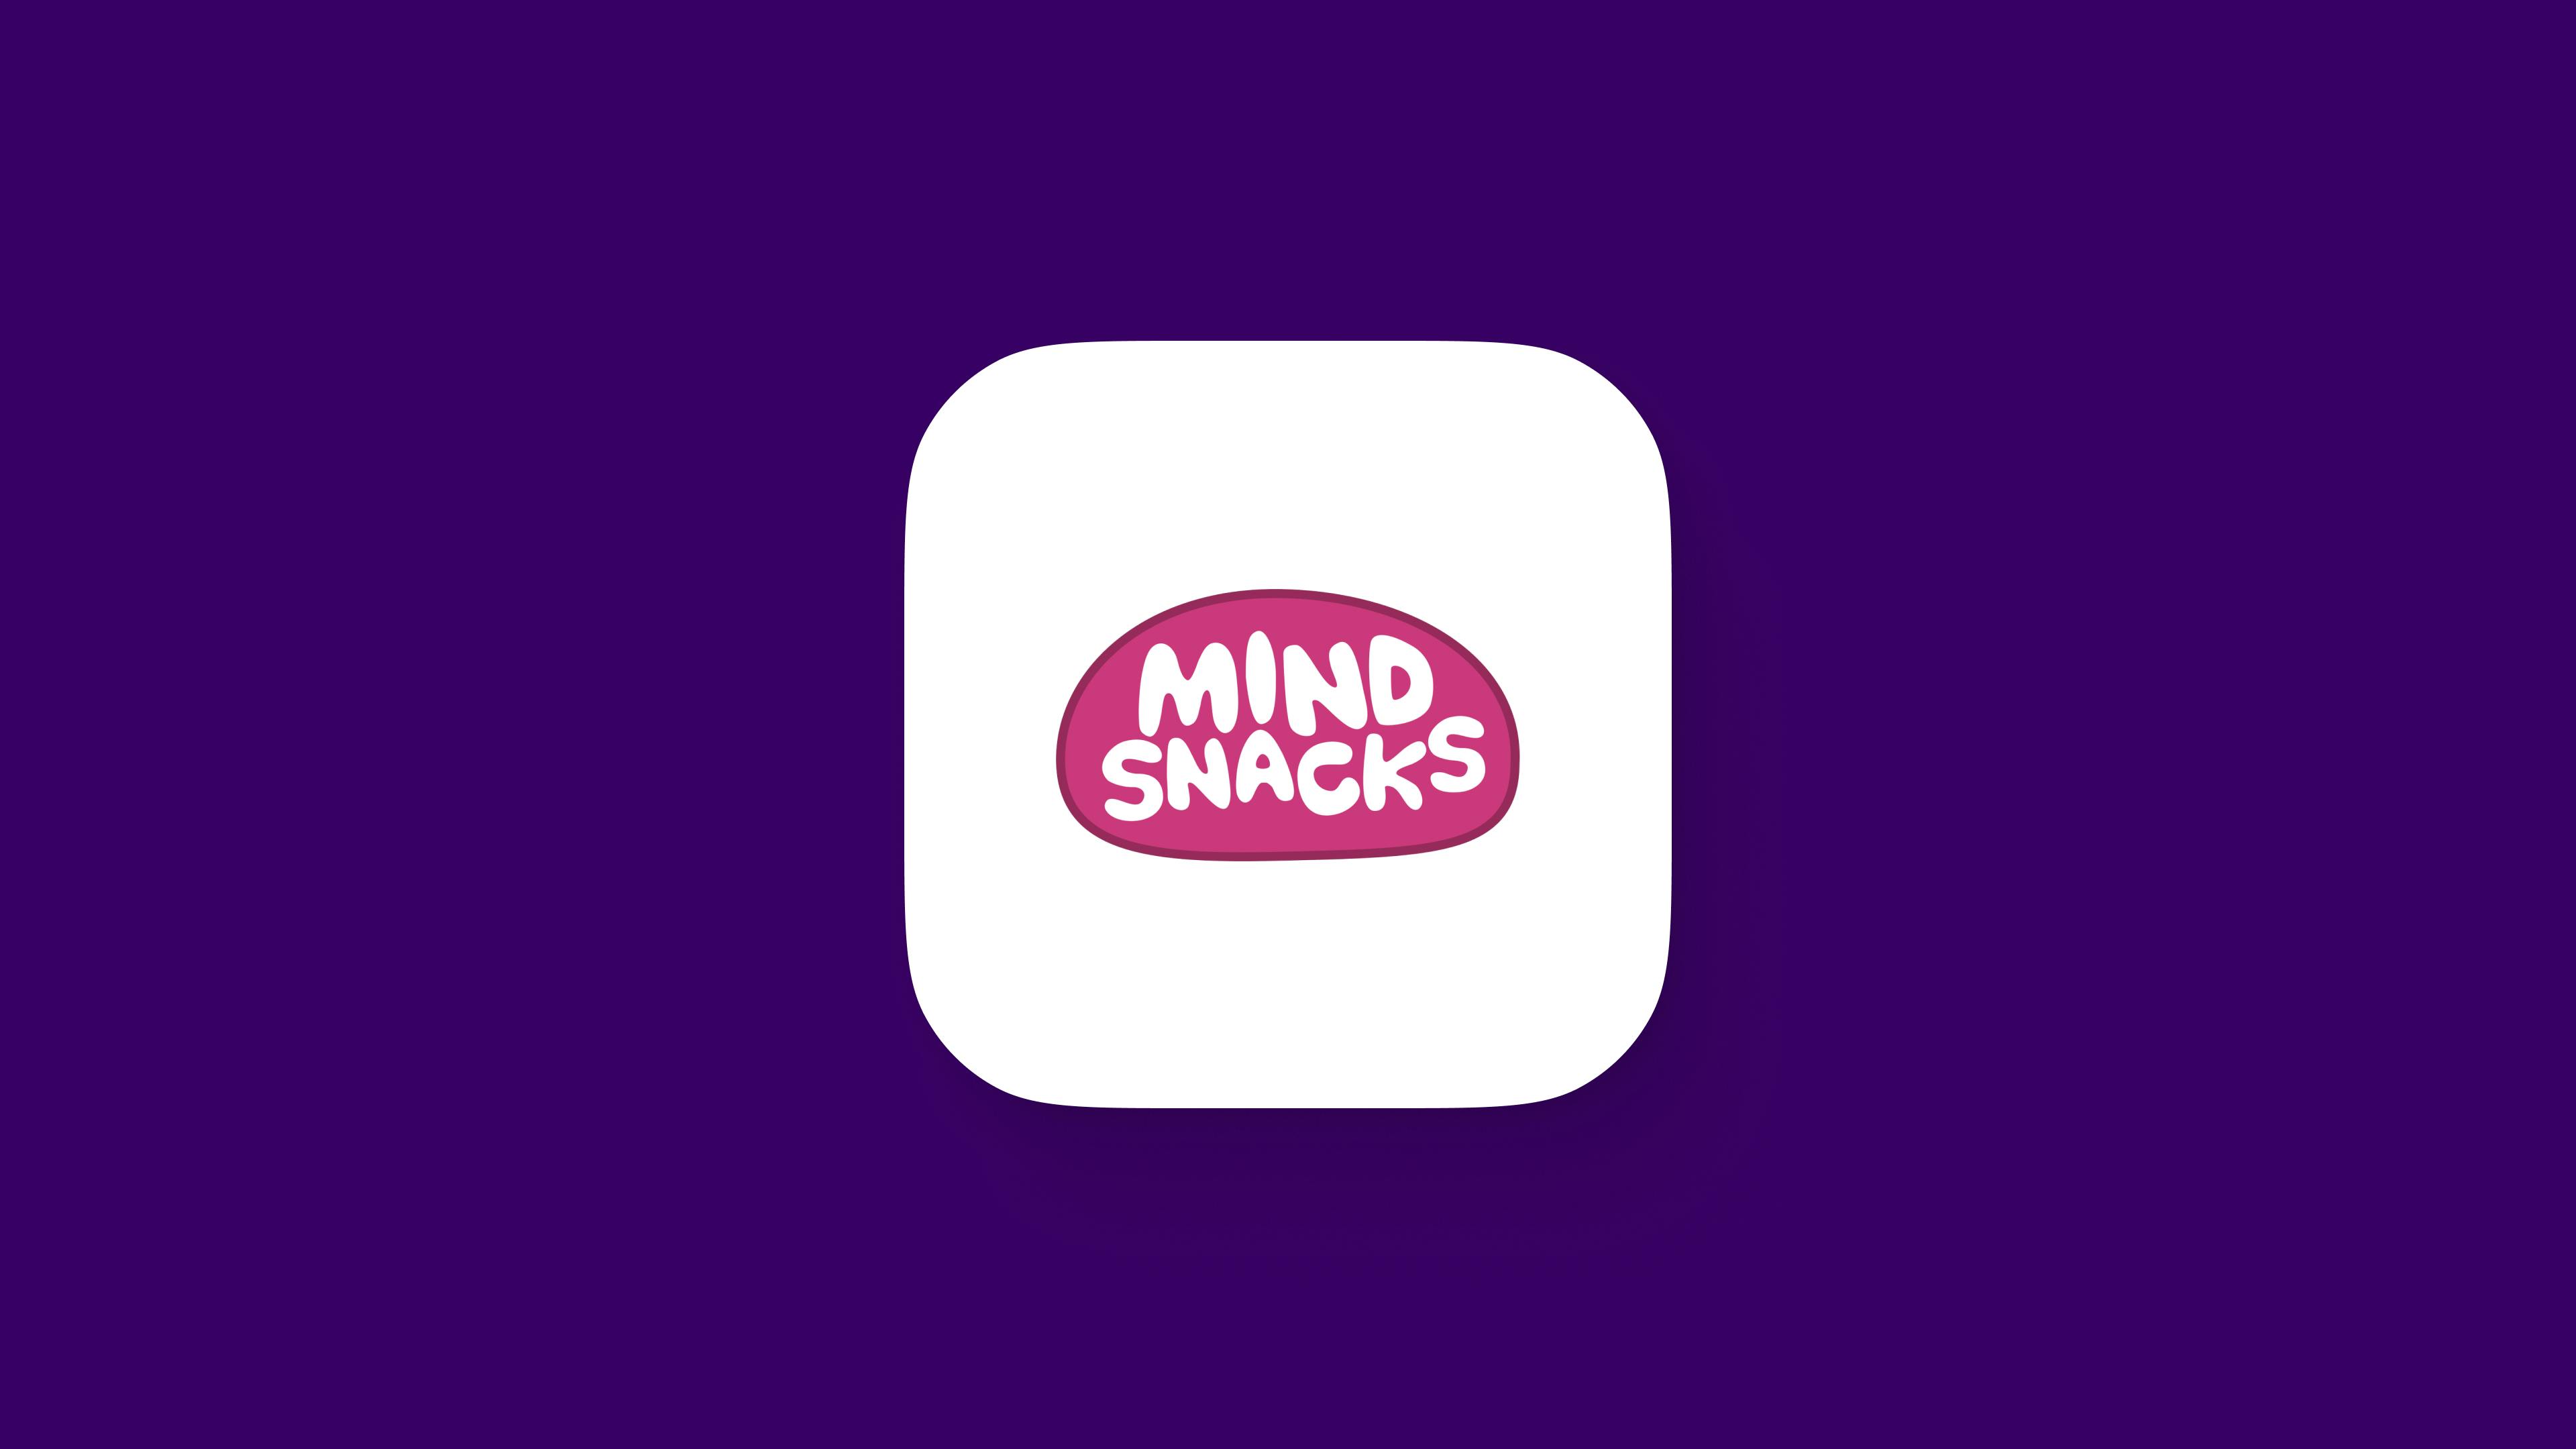 Mindsnacks for learning languages - Headway App